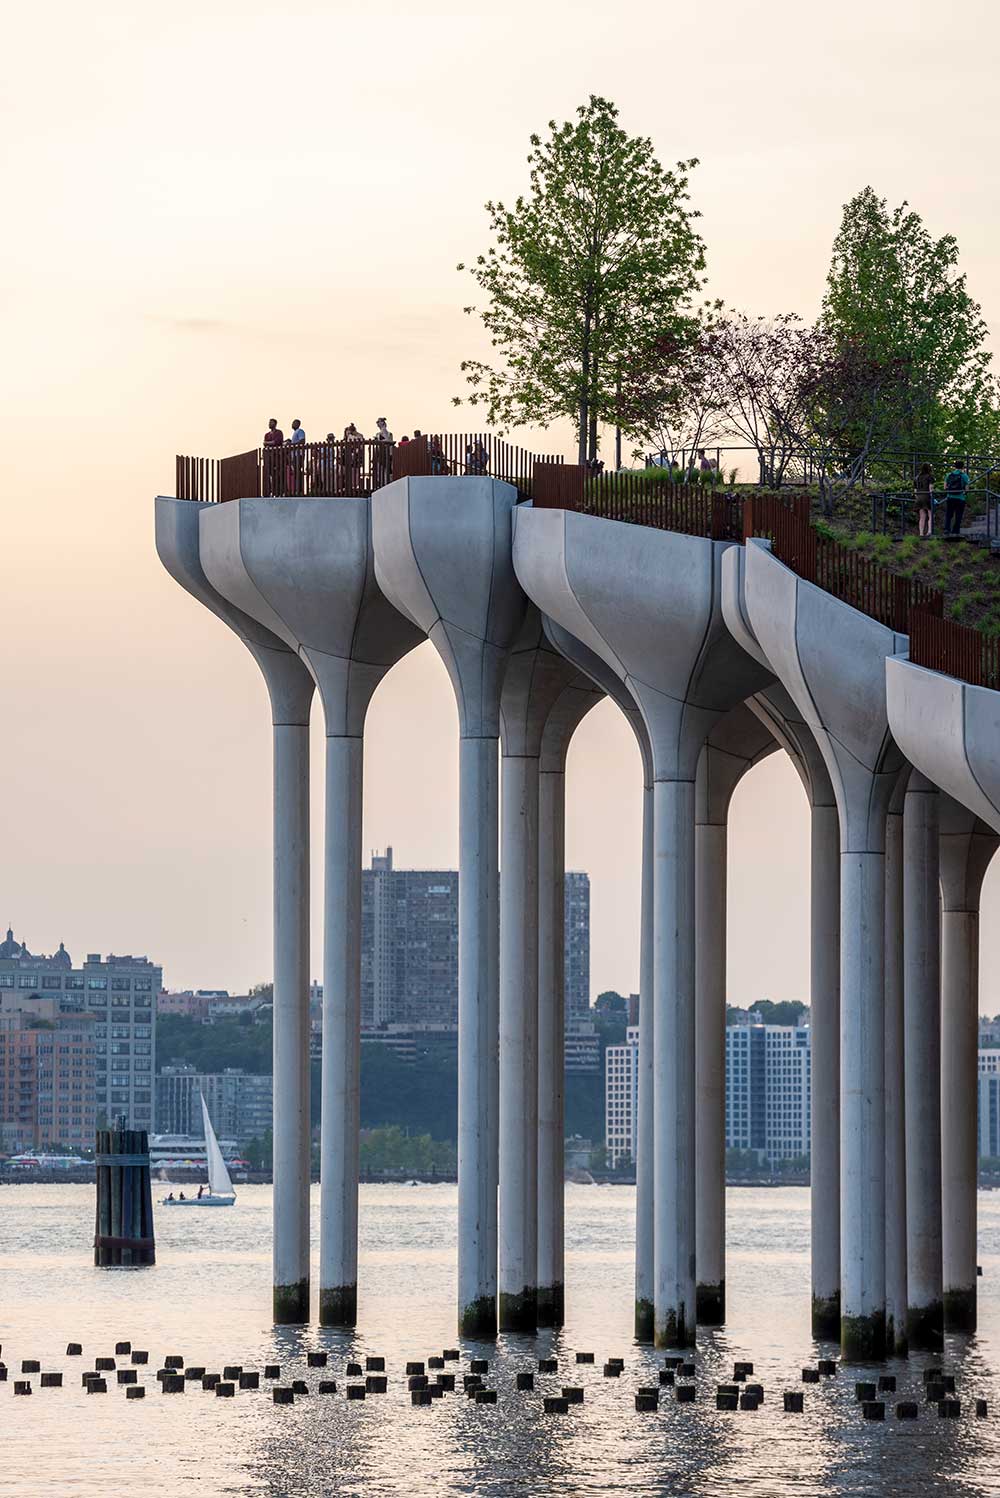 Little Island's original design concept pictured a park ‘floating’ above the Hudson River, propped up by a complex array of piles of differing heights. (Image: Timothy Schenck)